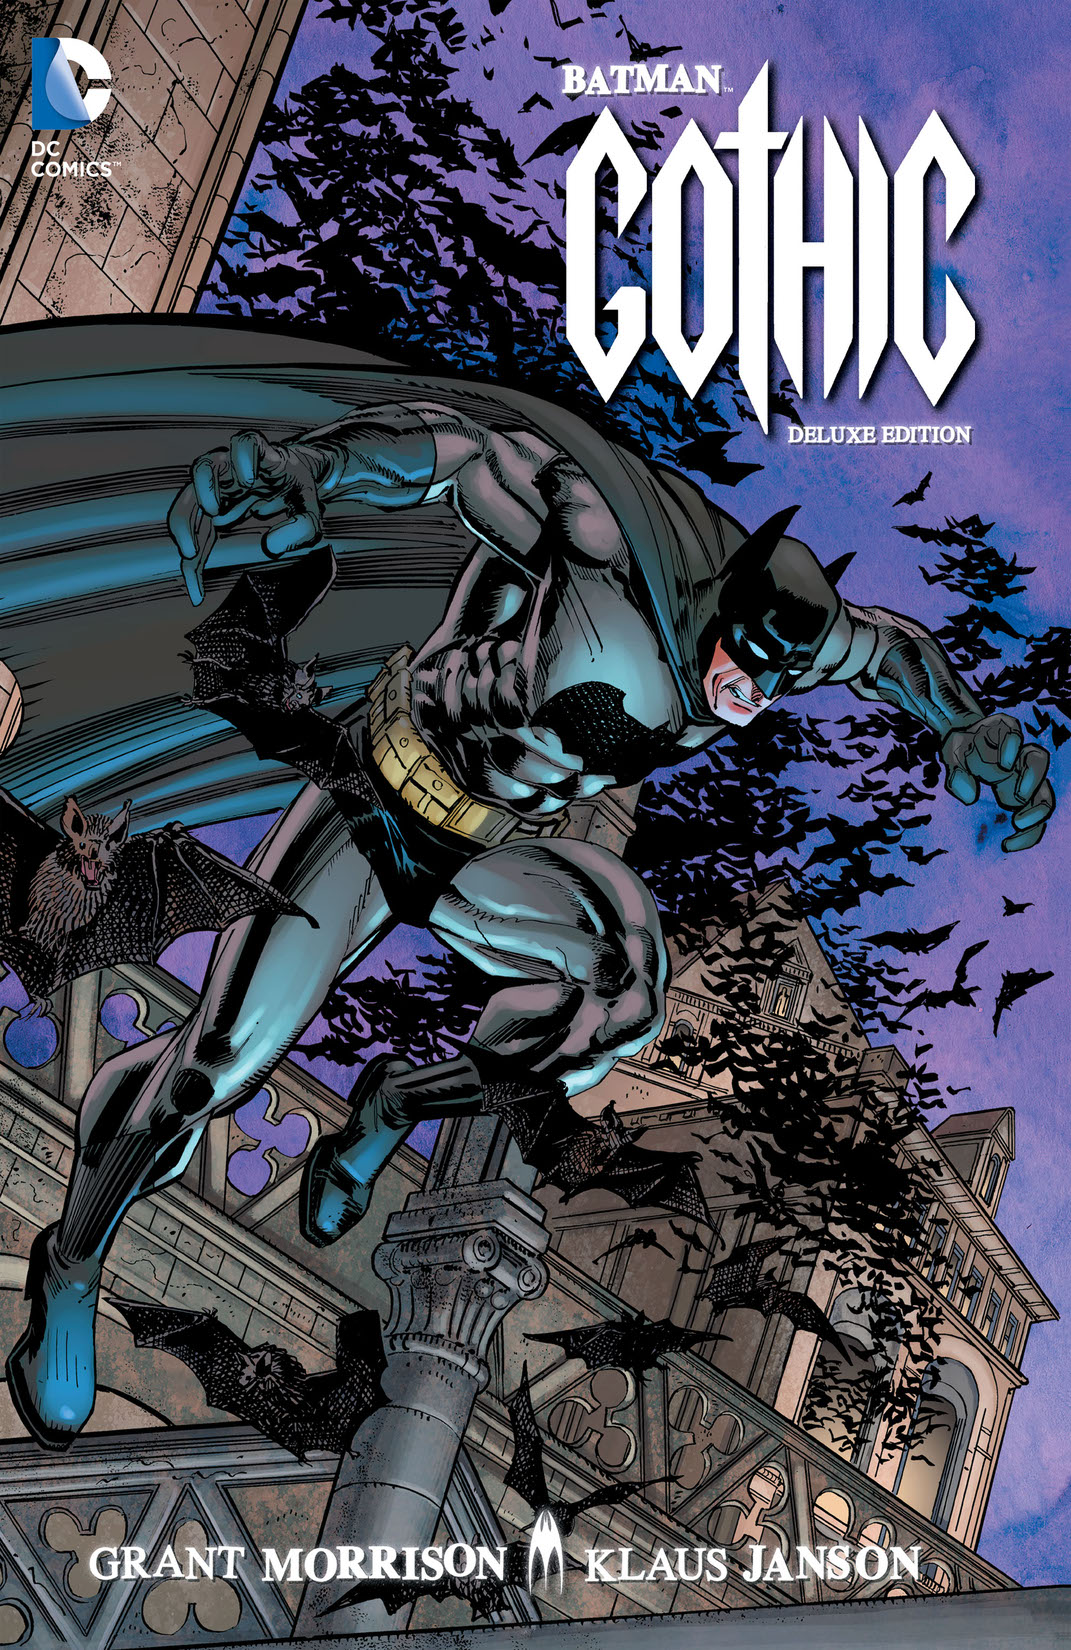 Batman: Gothic Deluxe Edition preview images